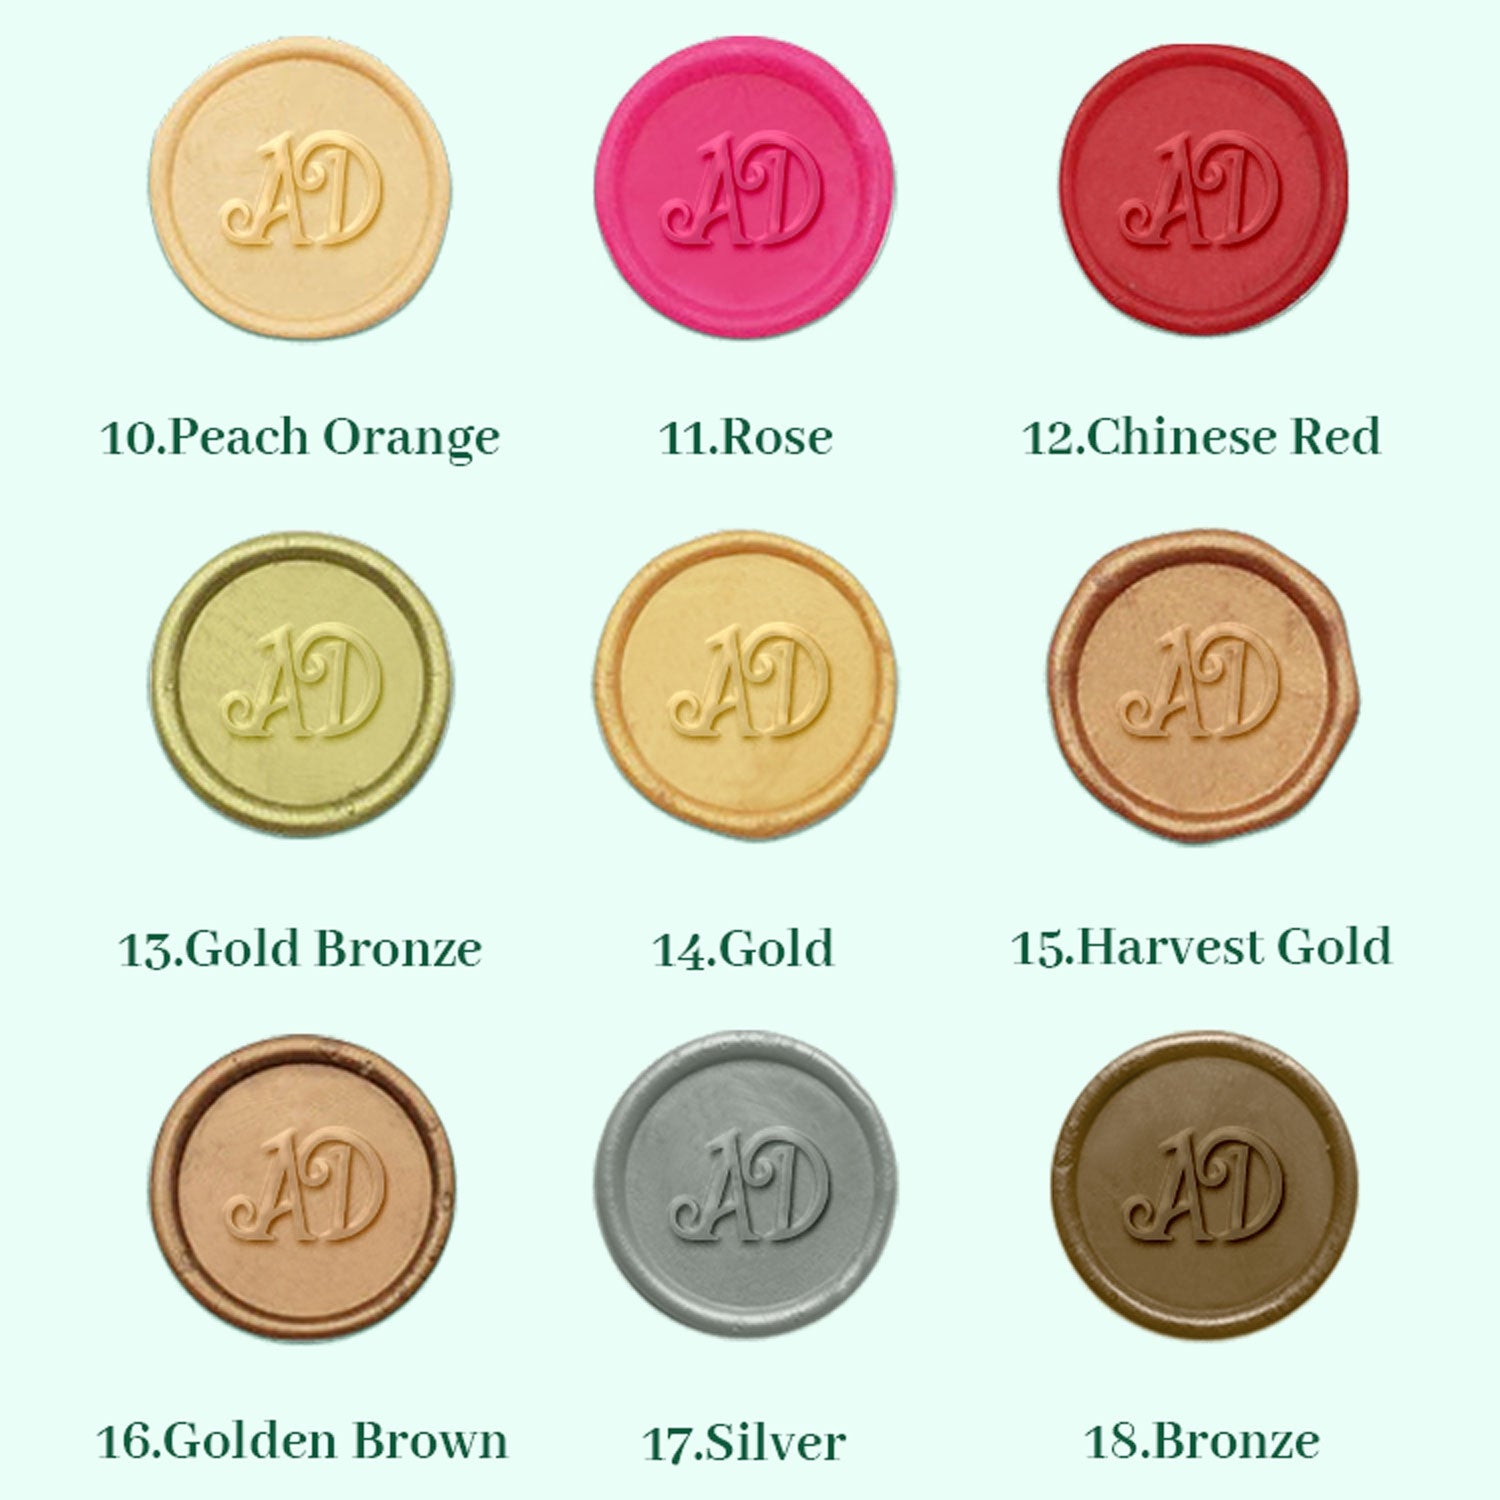 Ear of Wheat Double Initials Wedding Custom Self-Adhesive Wax Seal Stickers  - Personalized Elegance for Invitations, Favors, and More